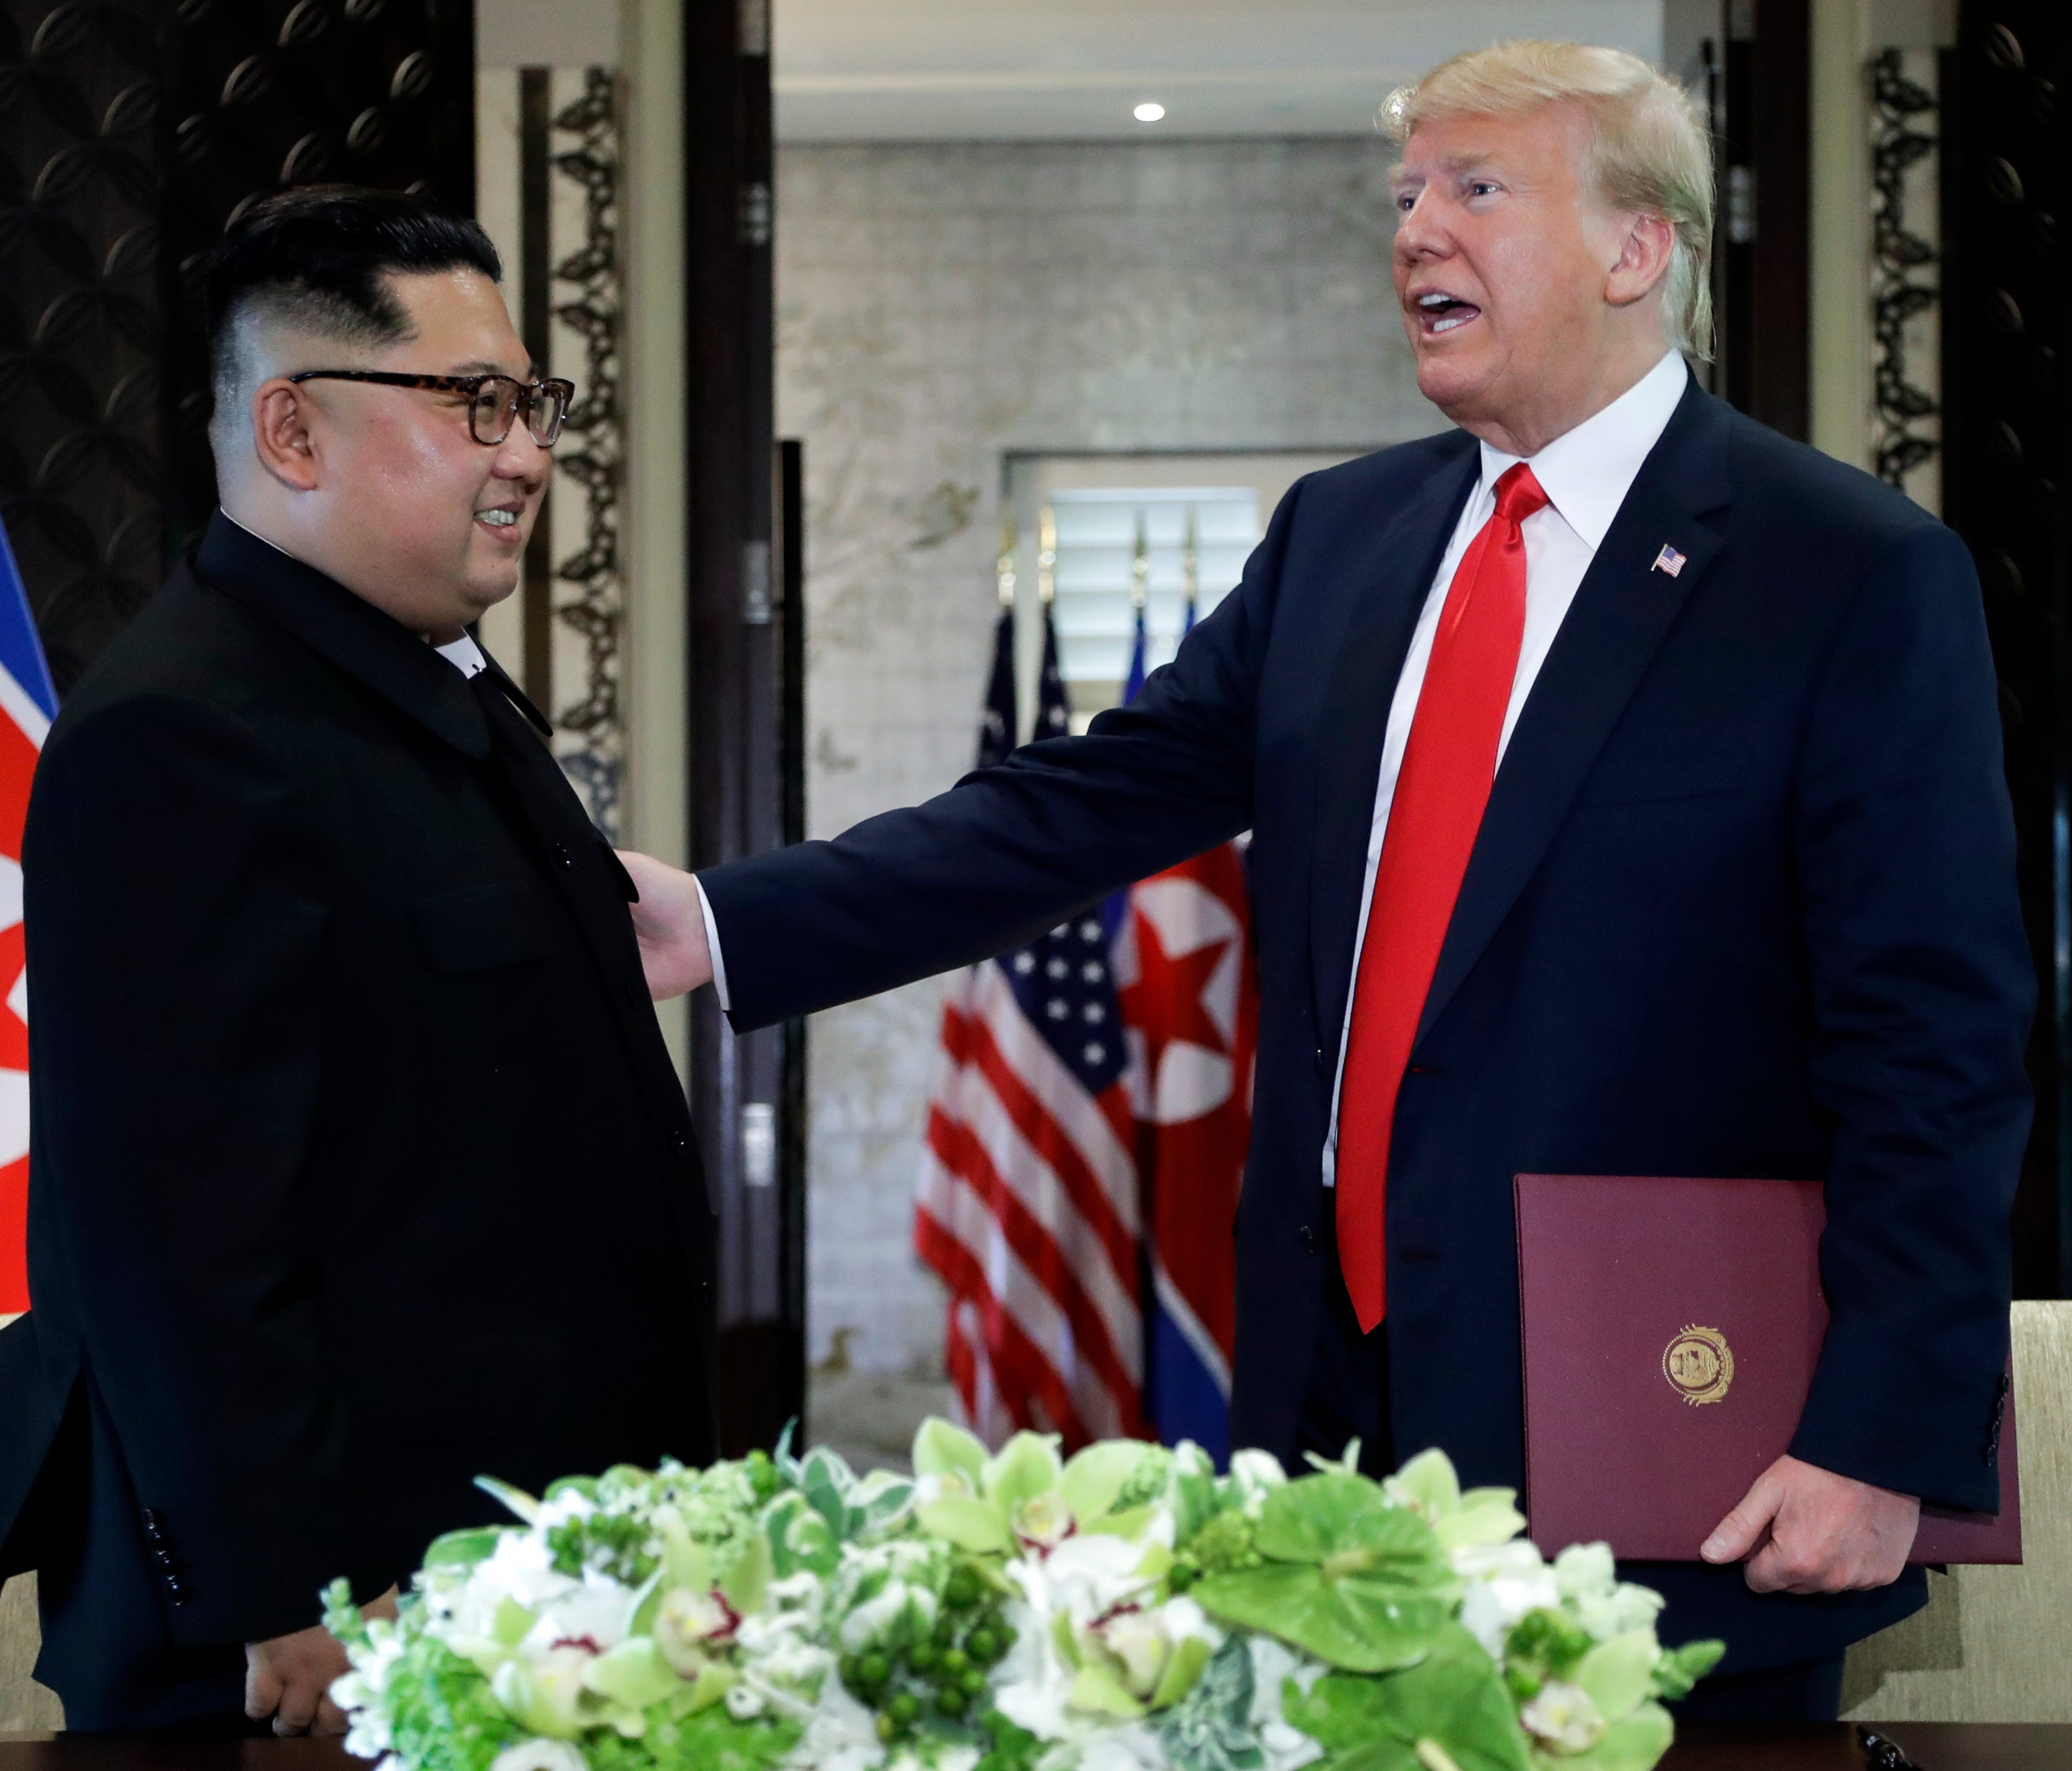 President Trump and  North Korea leader Kim Jong Un after they signed documents at their Singapore summit.